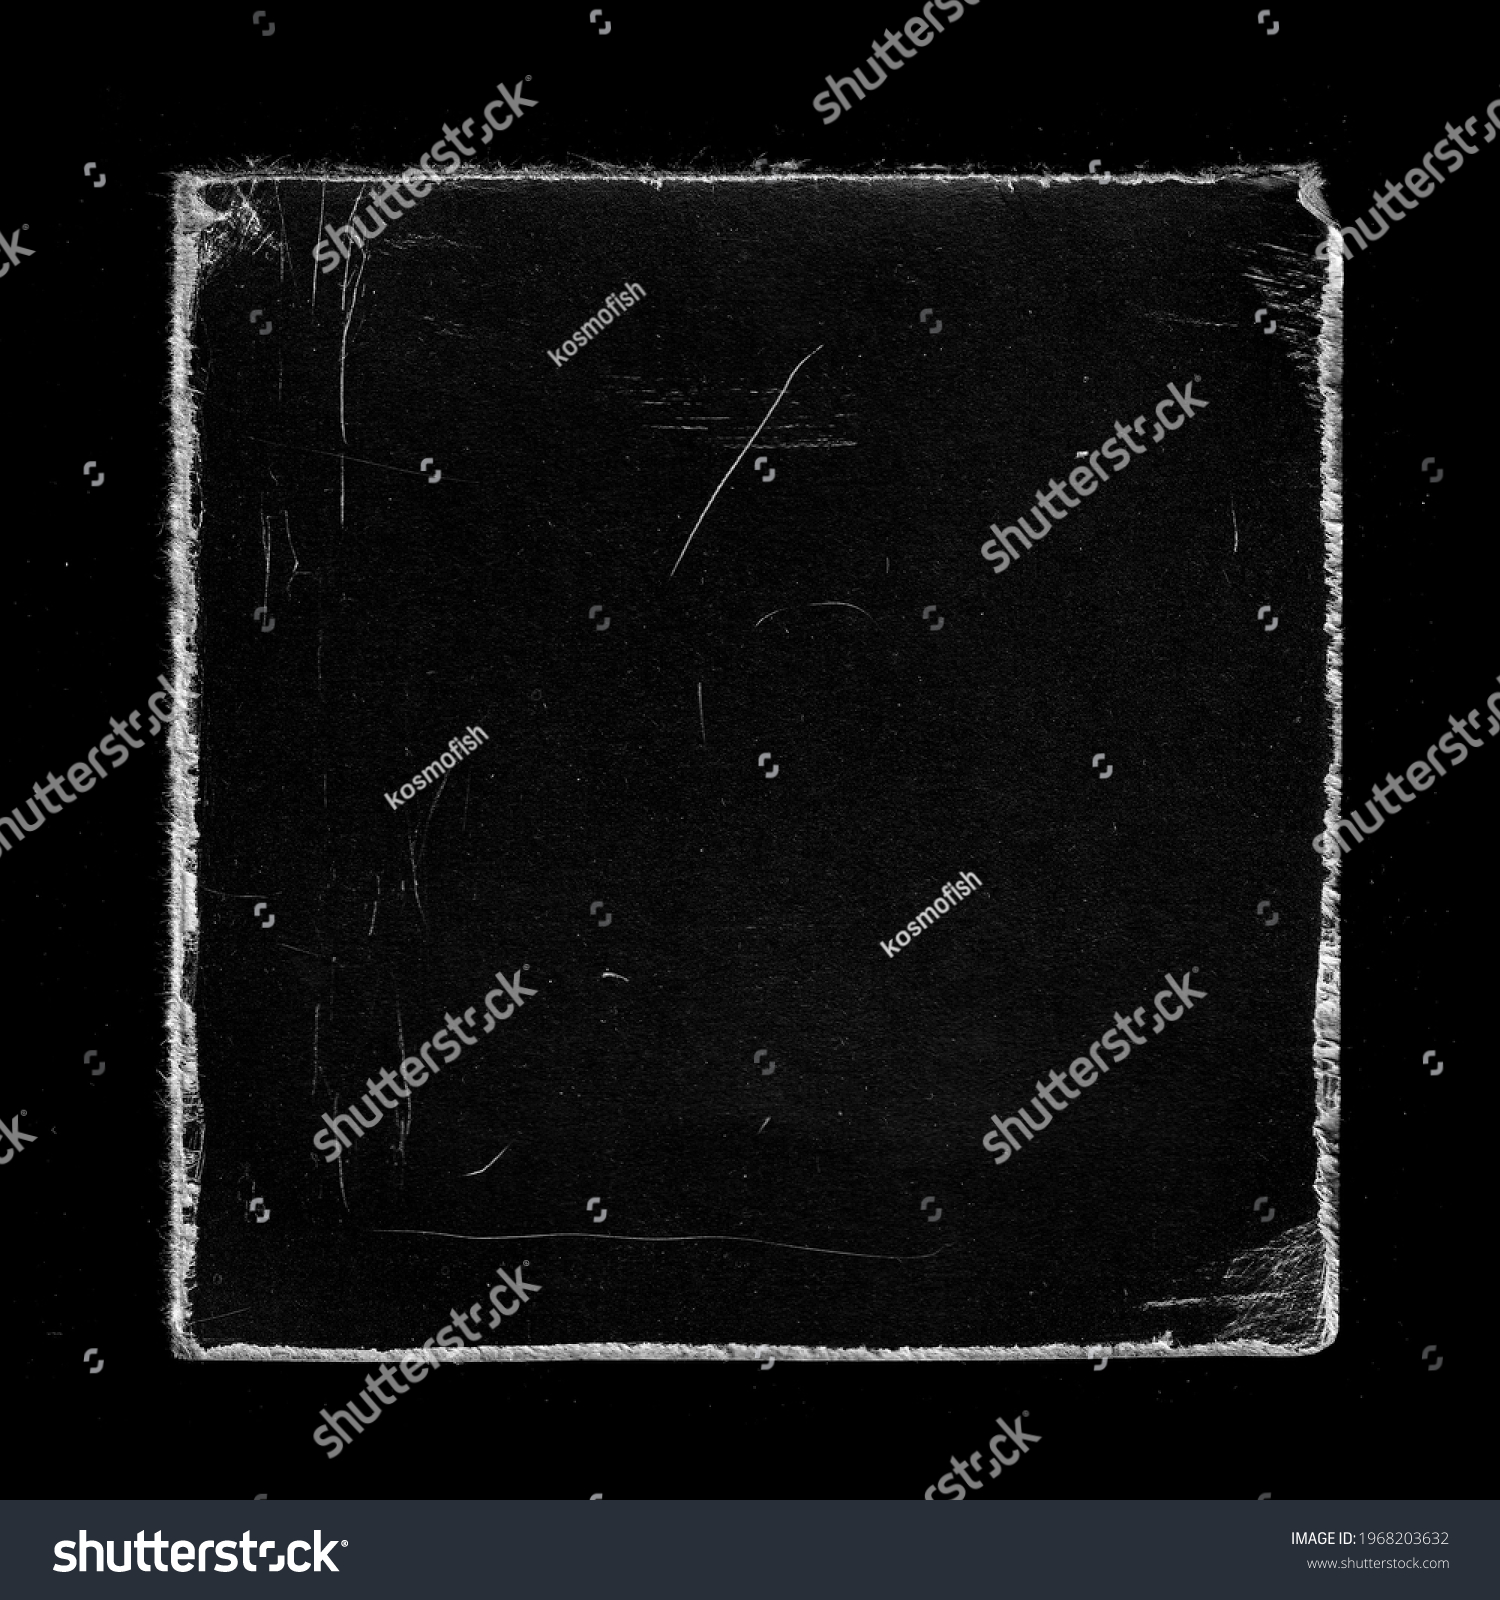 Old Black Square Vinyl CD Record Cover Package Envelope Template Mock Up. Empty Damaged Grunge Aged Photo Scratched Shabby Paper Cardboard Overlay Texture.  #1968203632